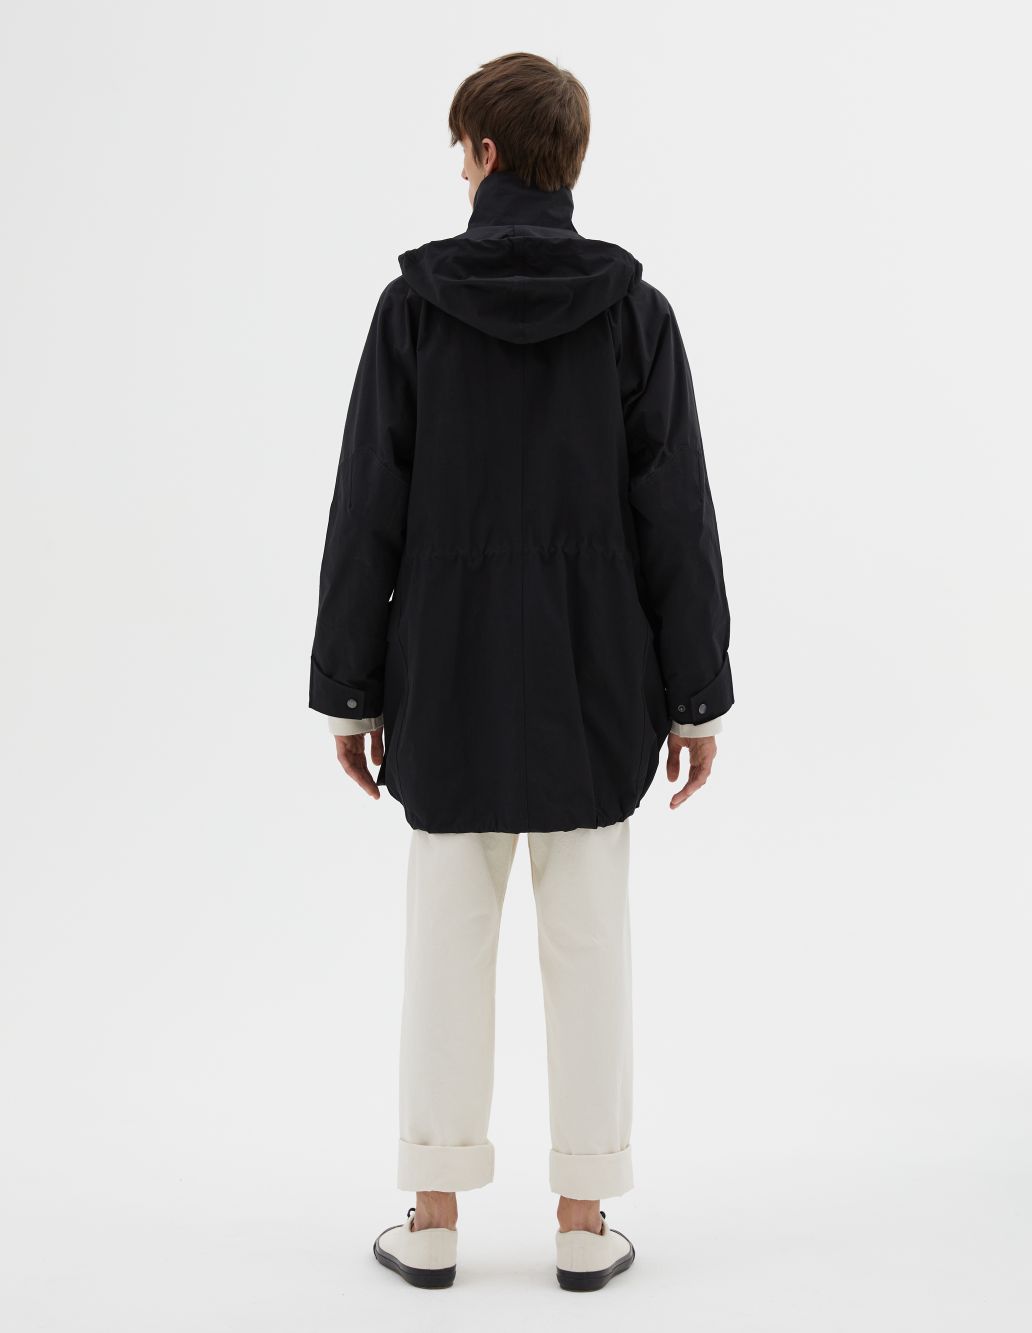 MARGARET HOWELL - Black polyester stand collar parka | MHL. by ...